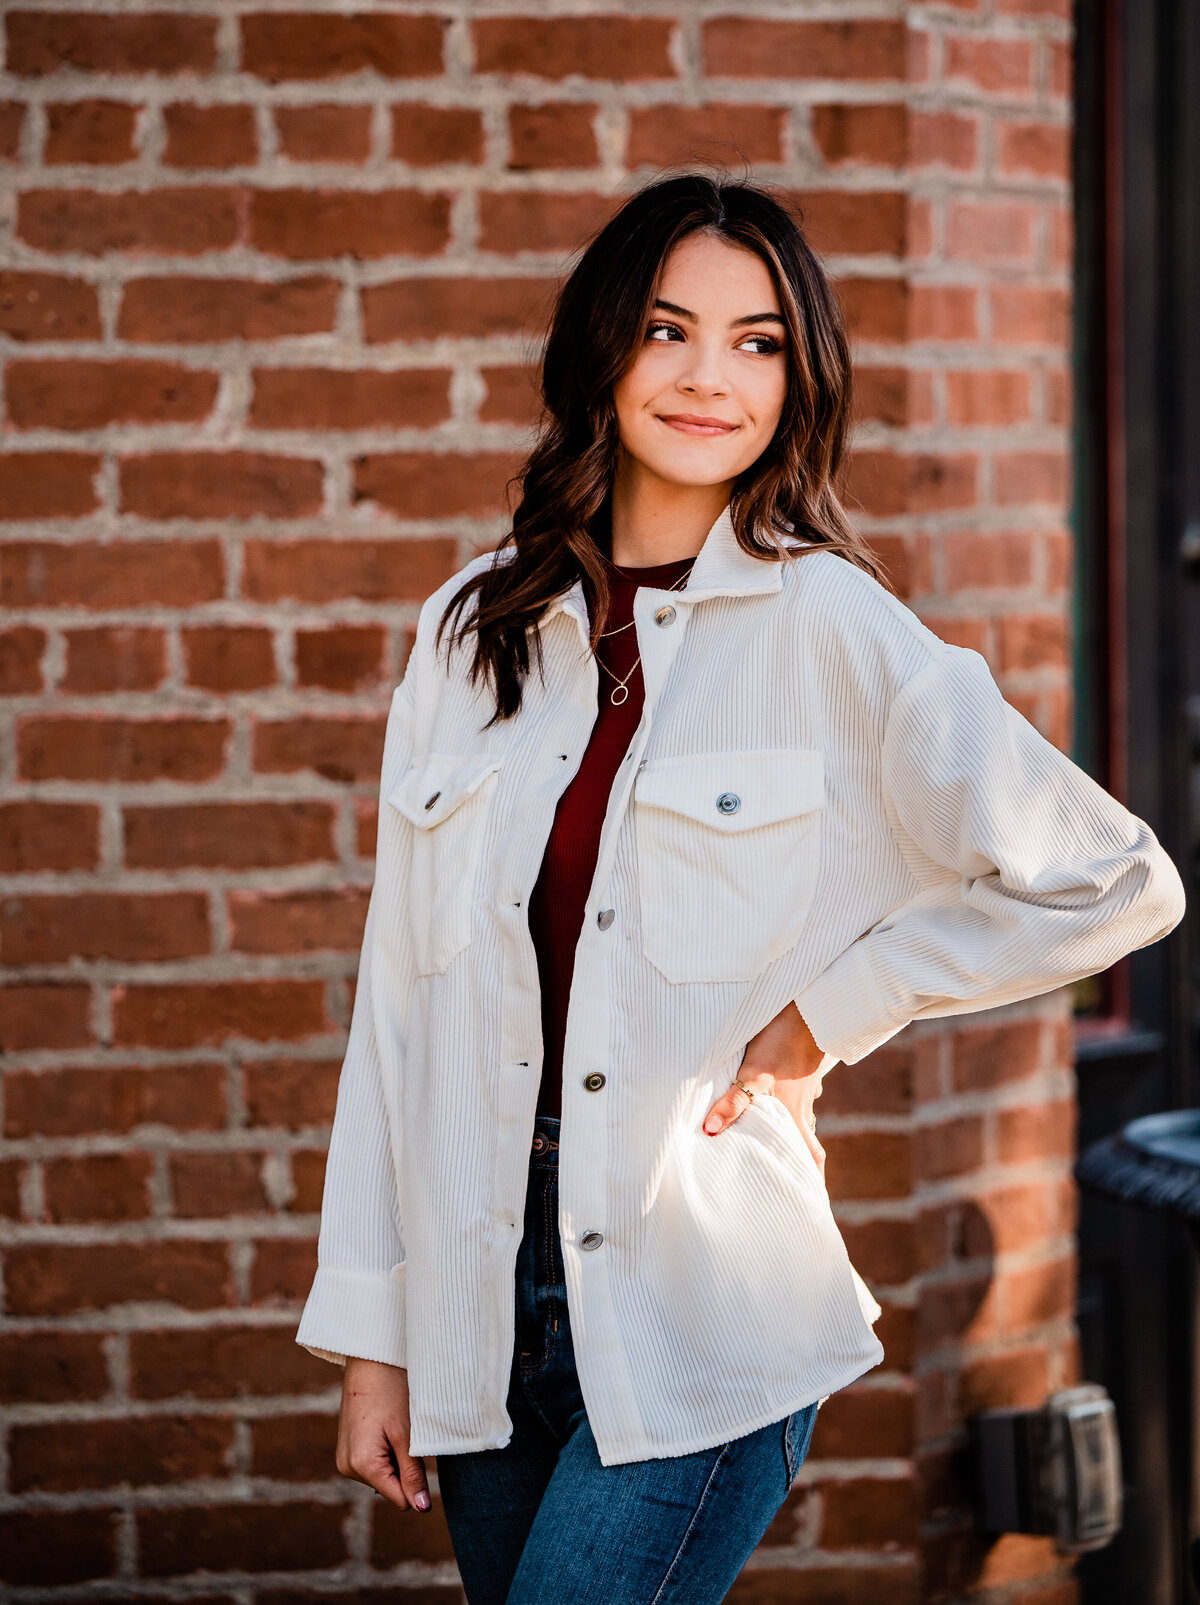 A senior wearing a white jacket stands in front of a red brick wall with her hand on her hip.